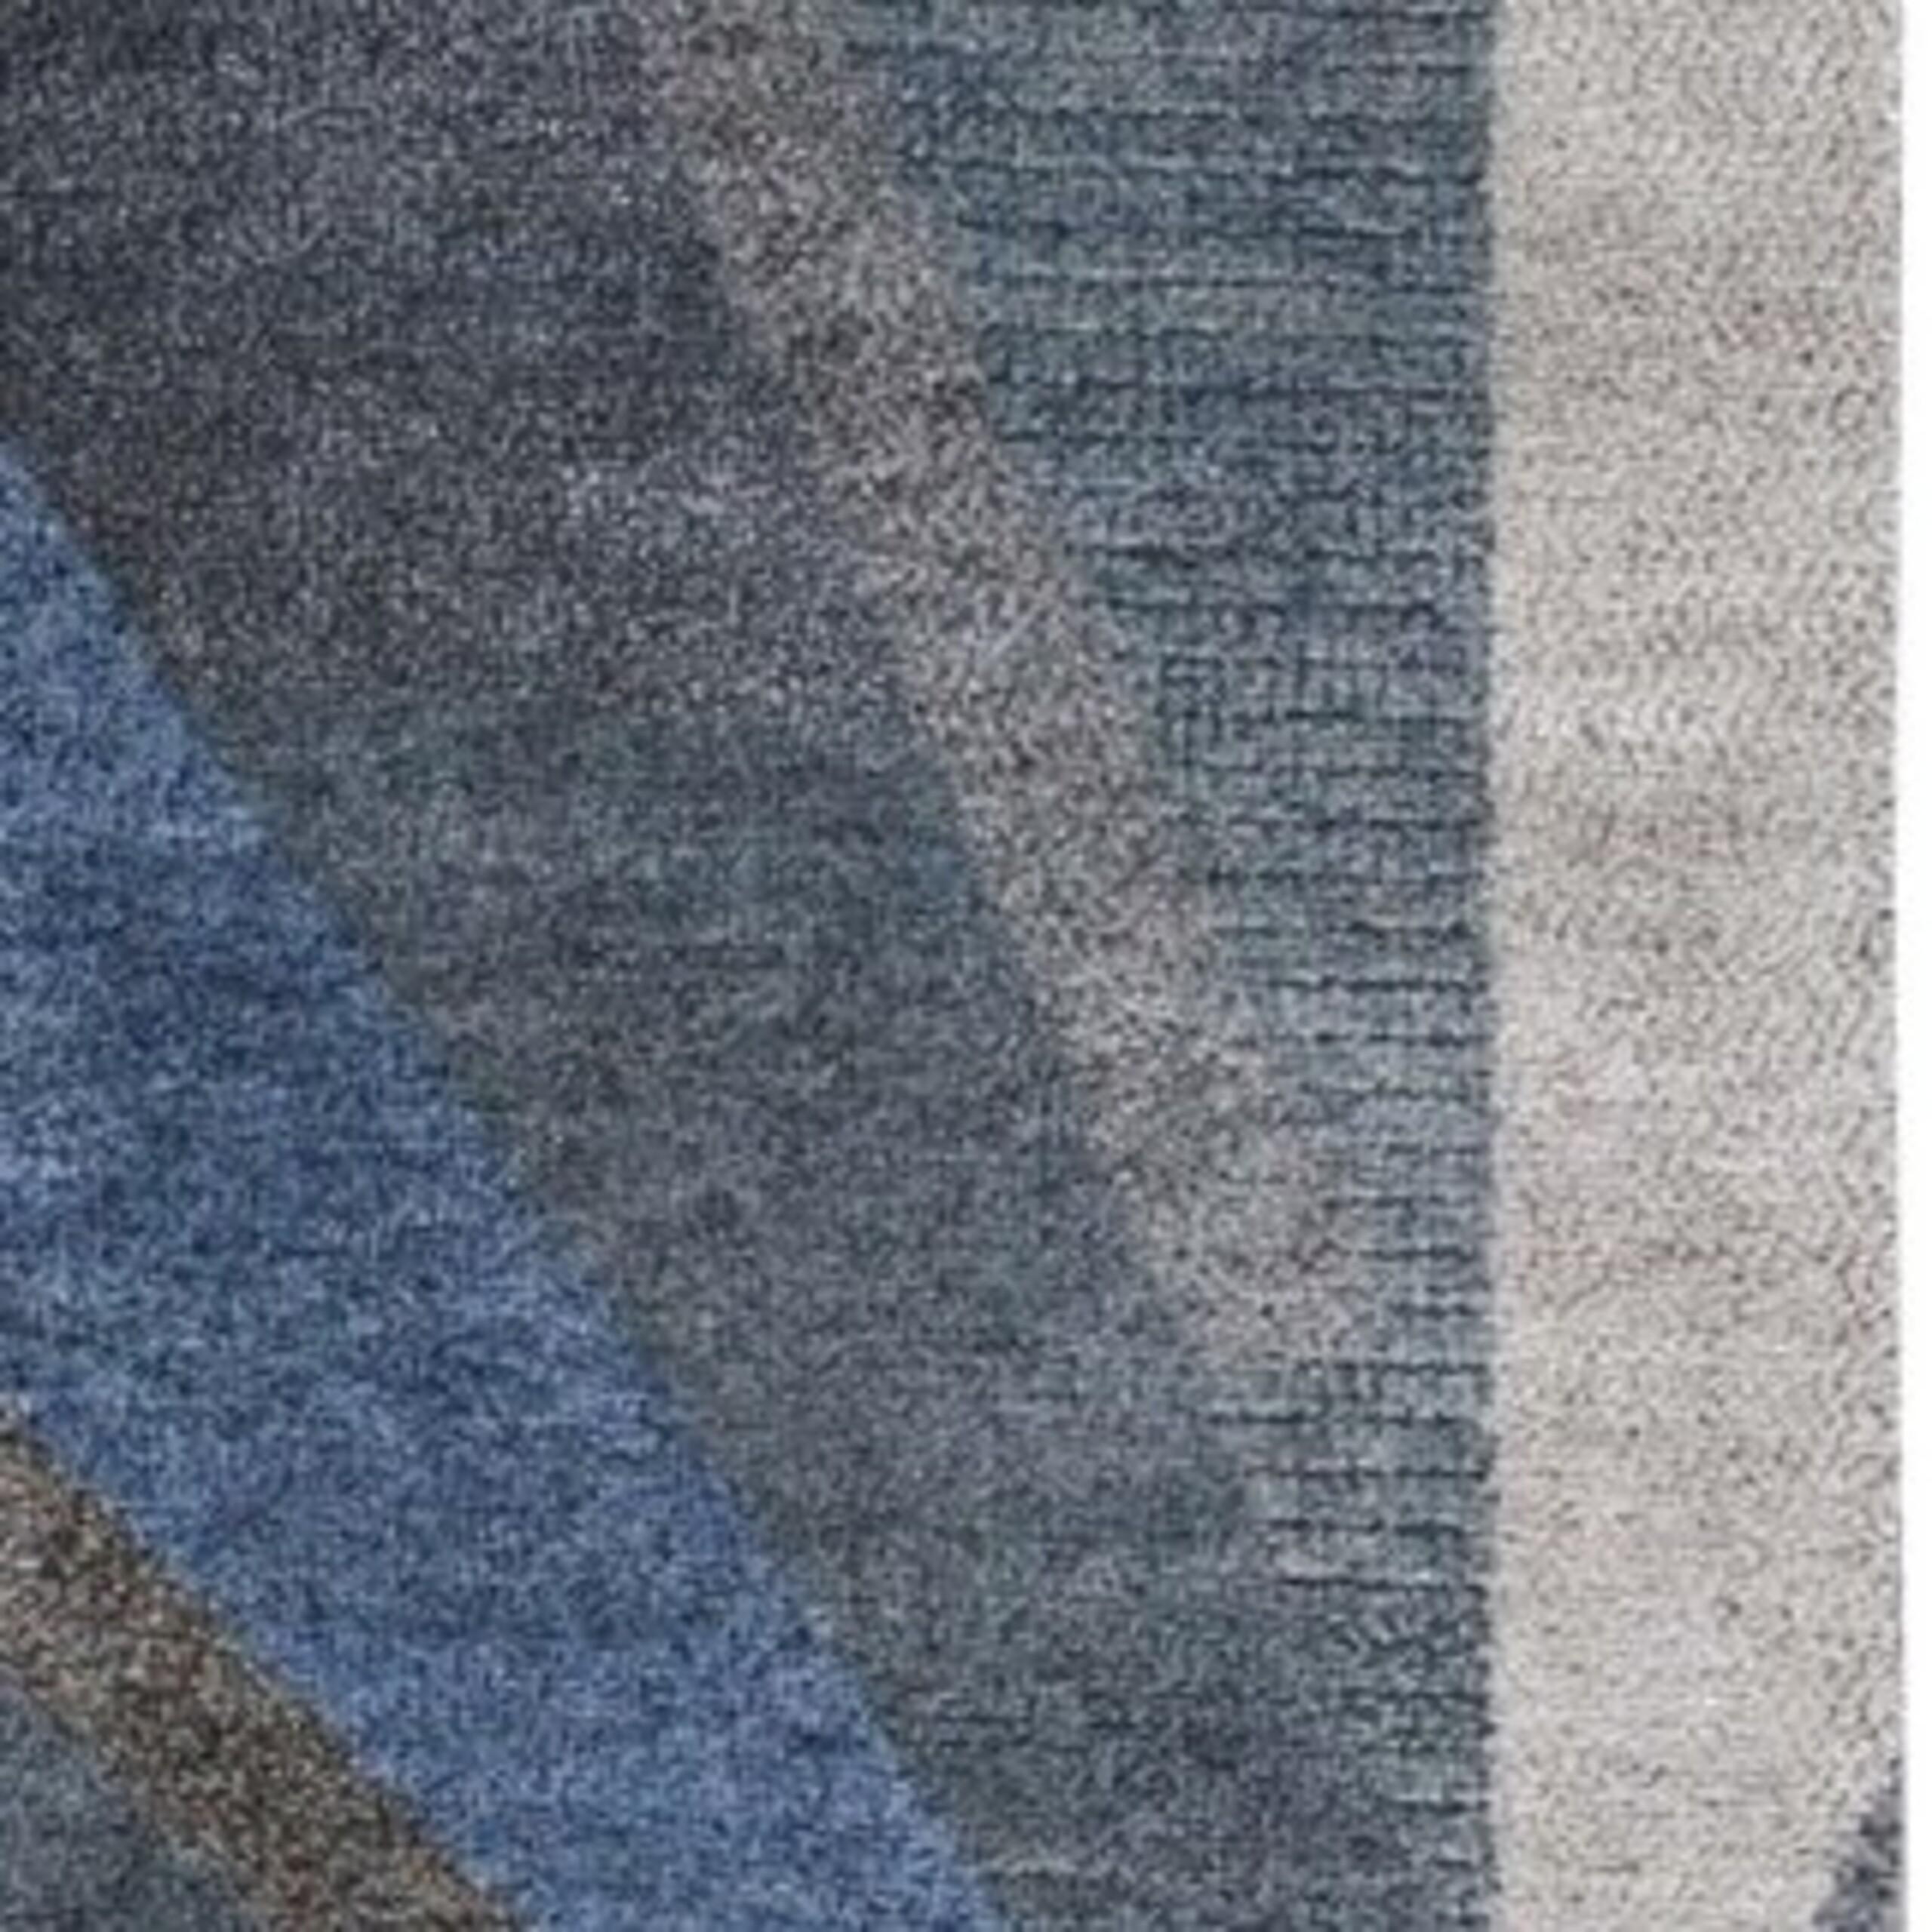 Nazmiyal Collection Geometric Modern Transitional Rug. 7 ft 5 in x 11 ft 3